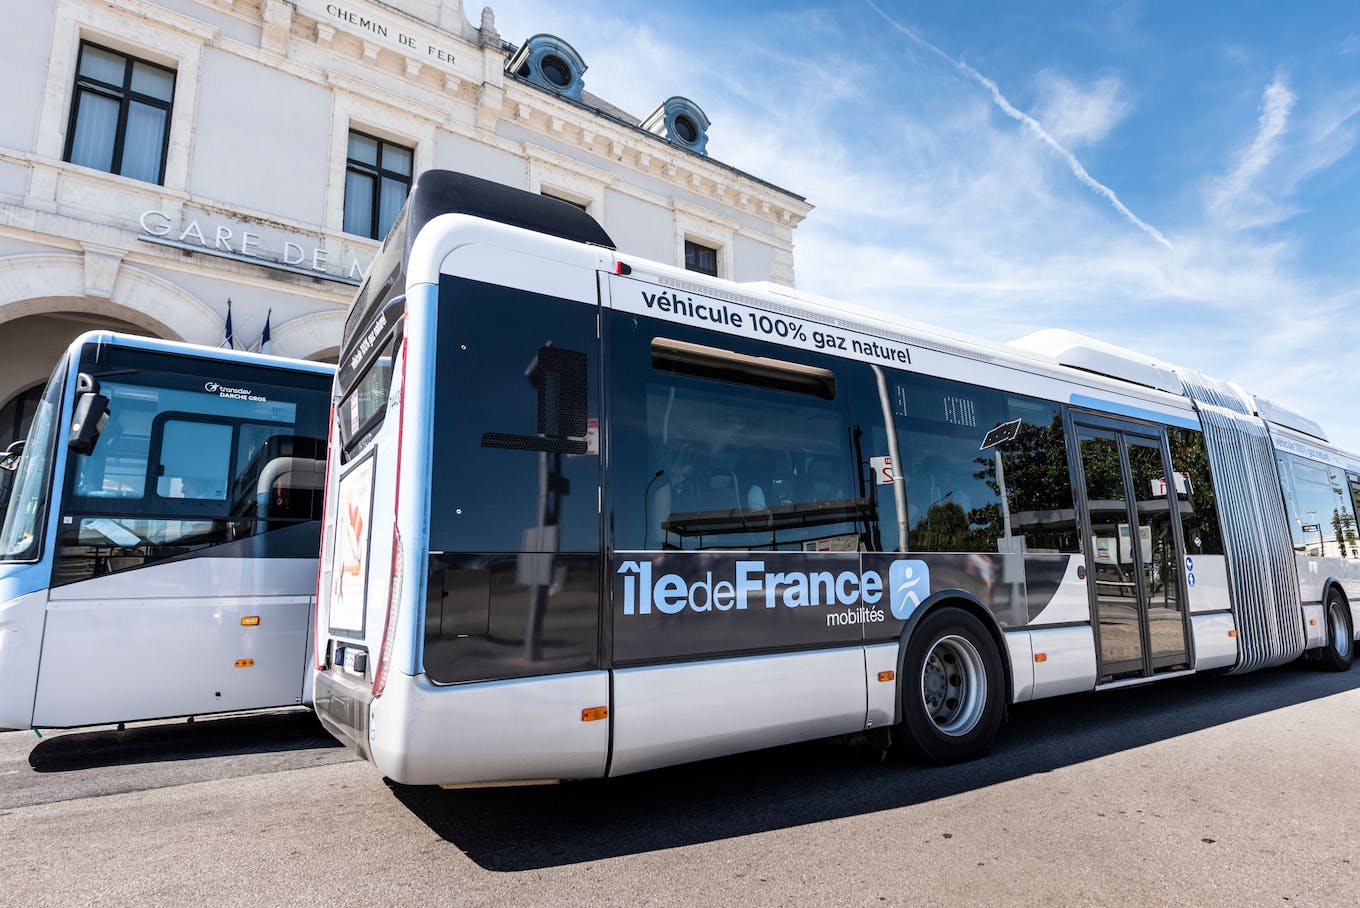 A new numbering of bus lines on the east side of Roissy-Pays de France